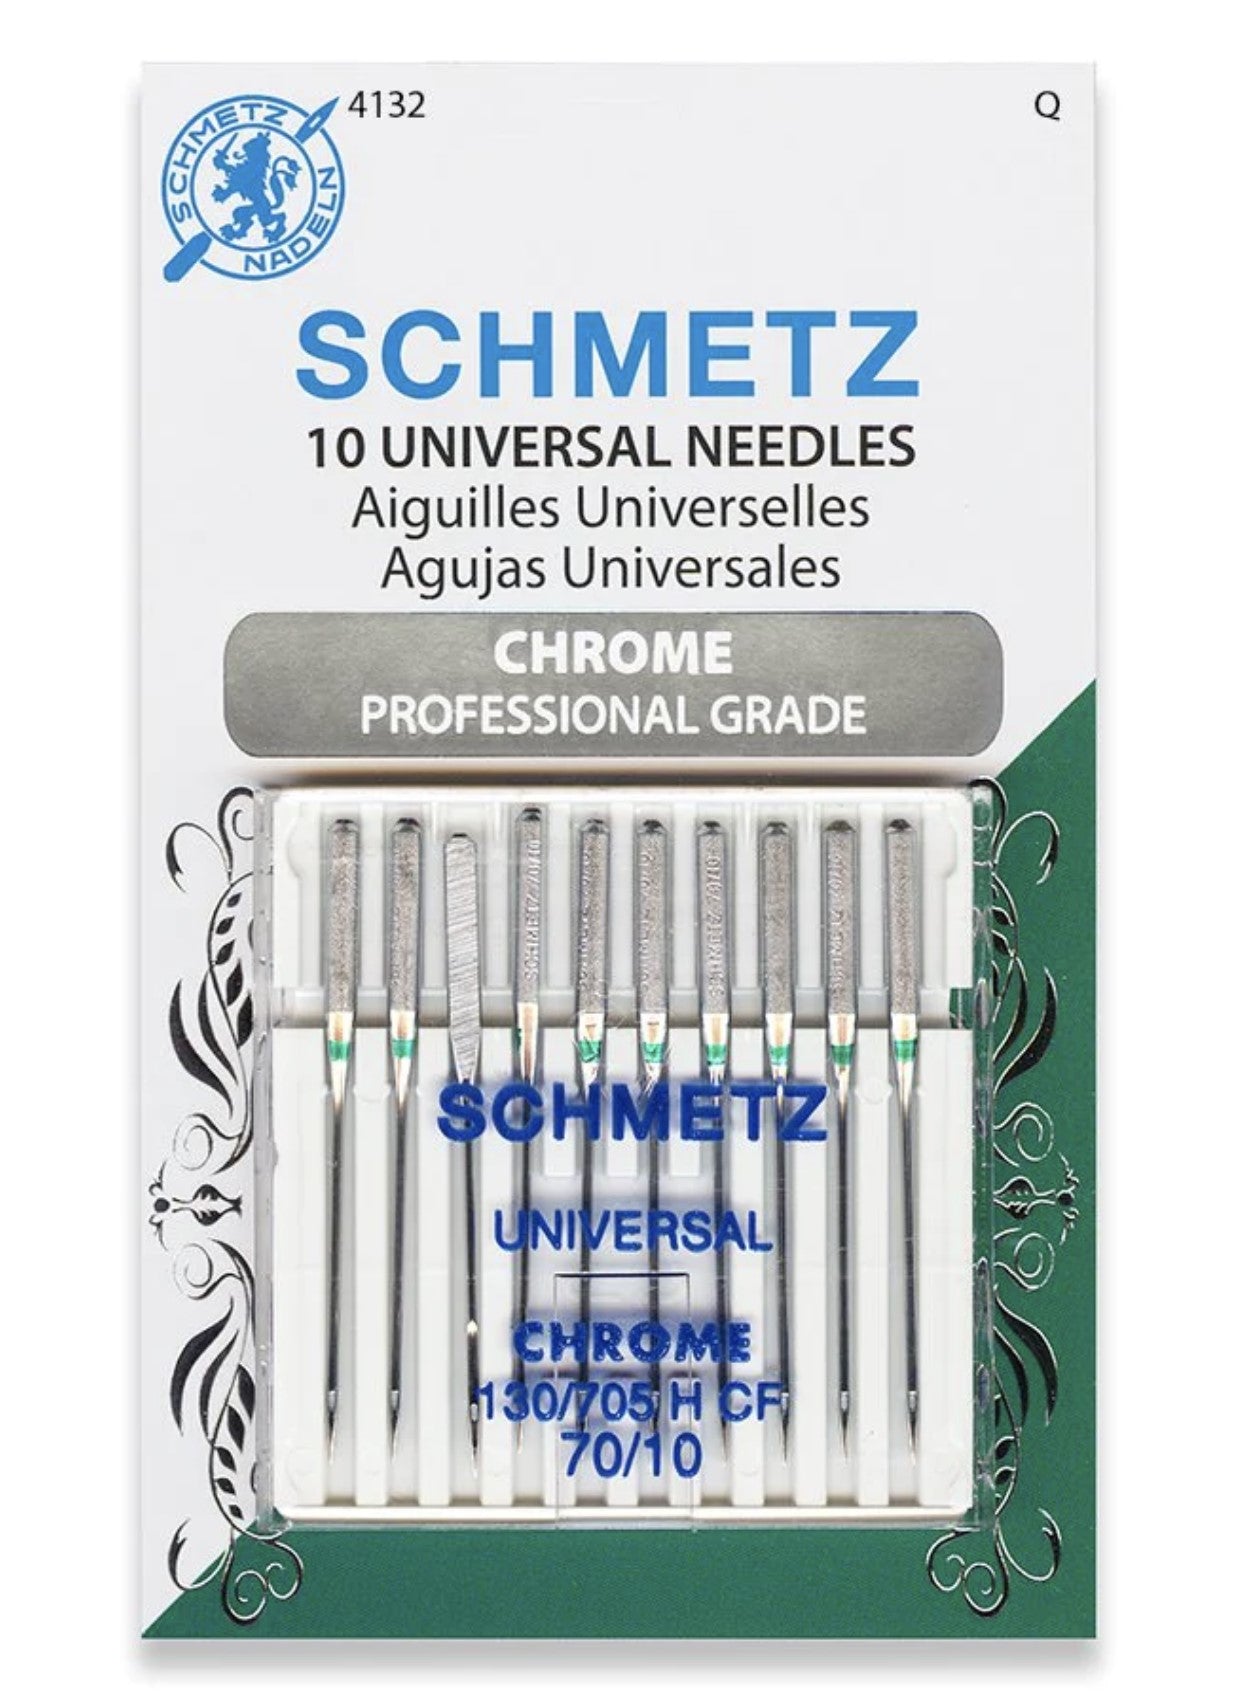 Home Sewing Machine Universal Chrome Professional Grade Needles (130/705 H CF)   Various by SCHMETZ